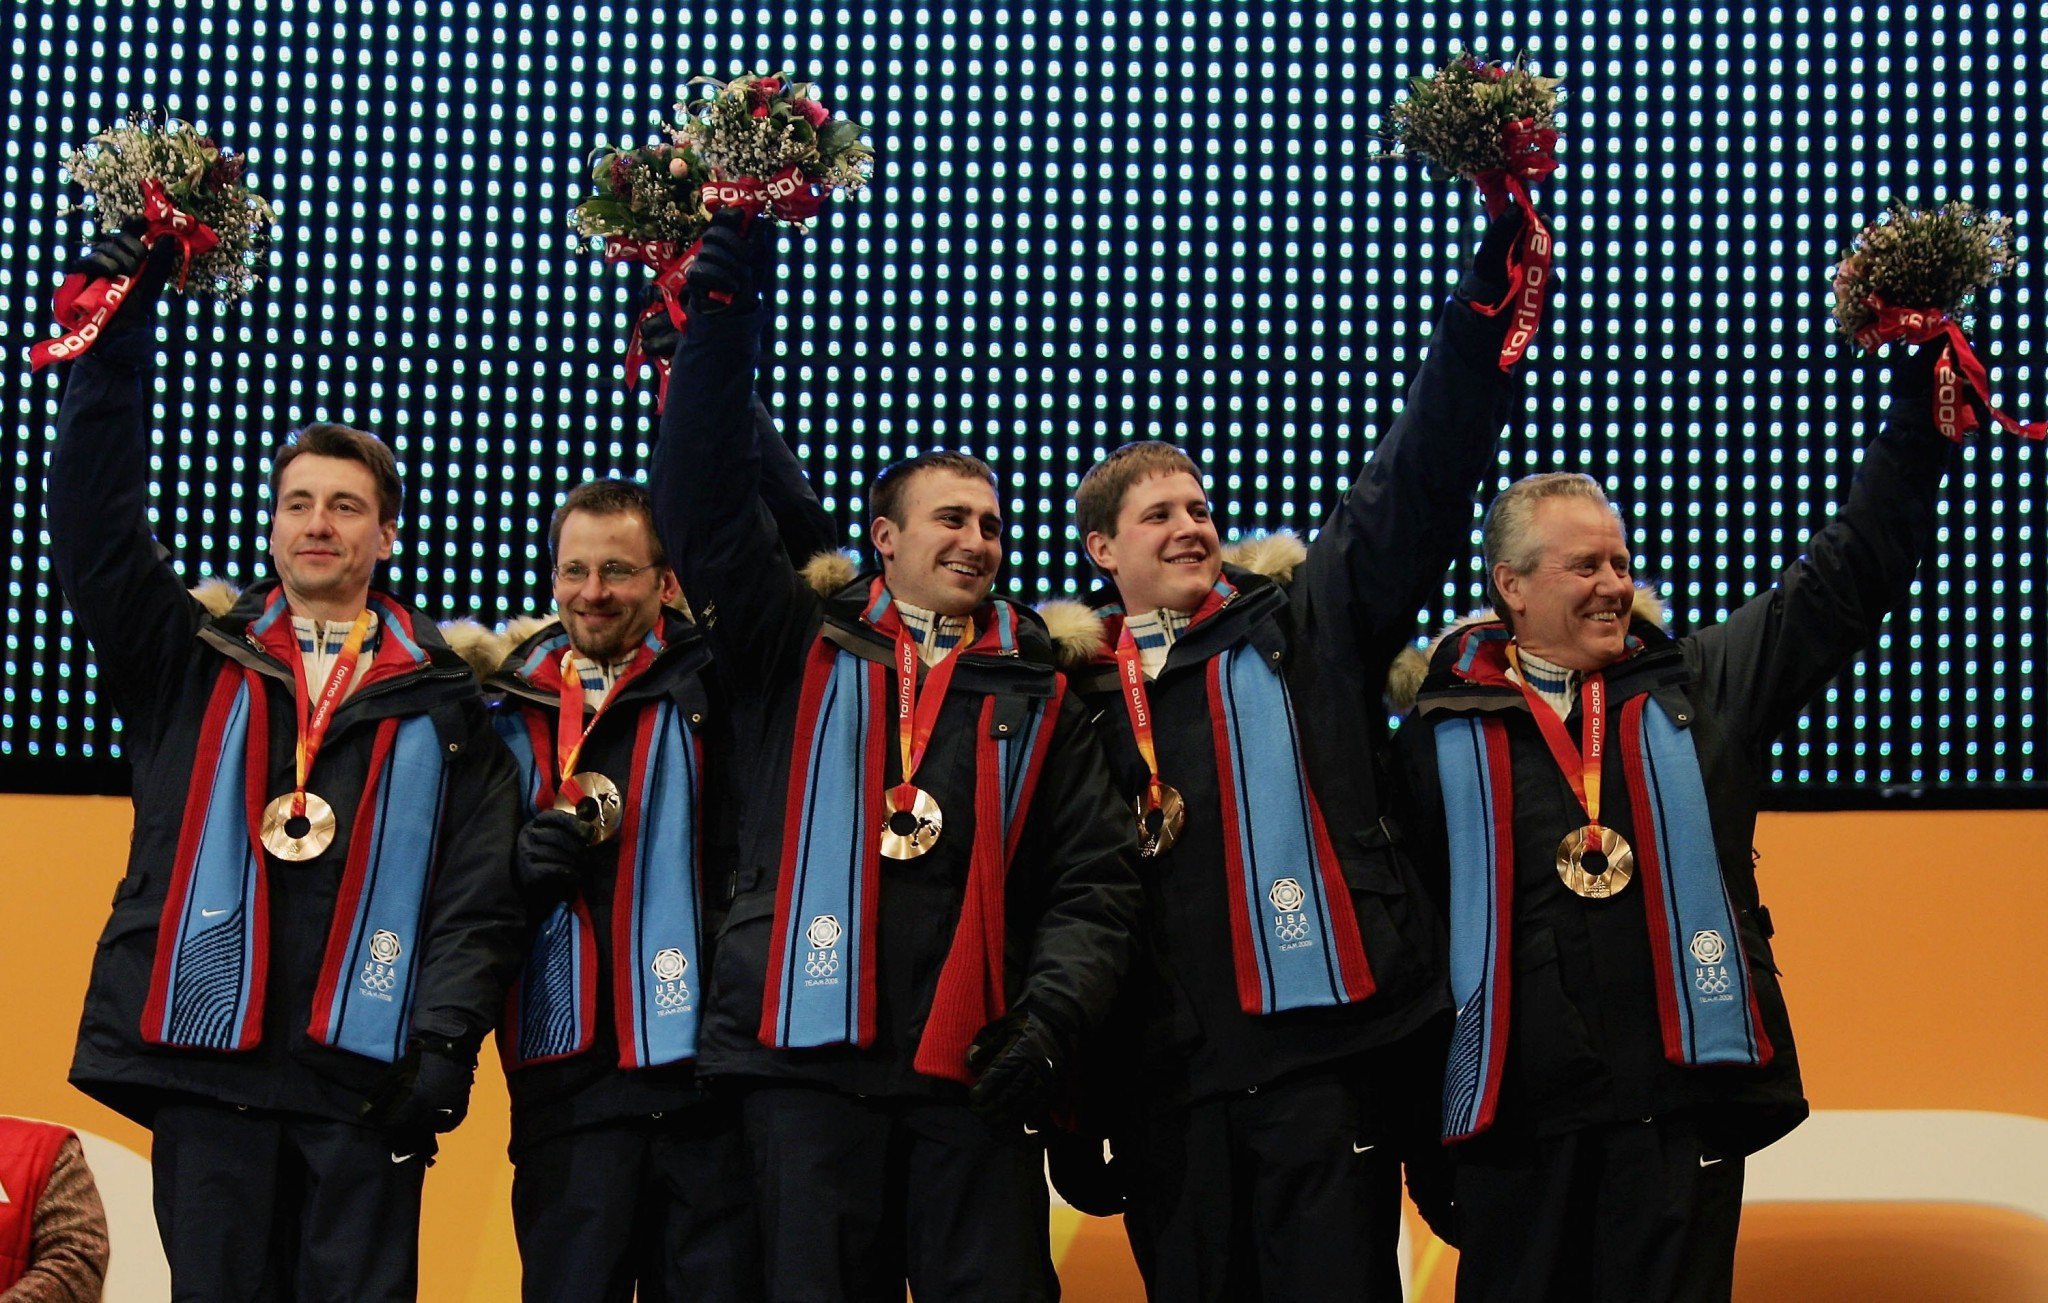 The United States' only Winter Olympic curling medal came in men's competition at Turin 2006 ©Getty Images